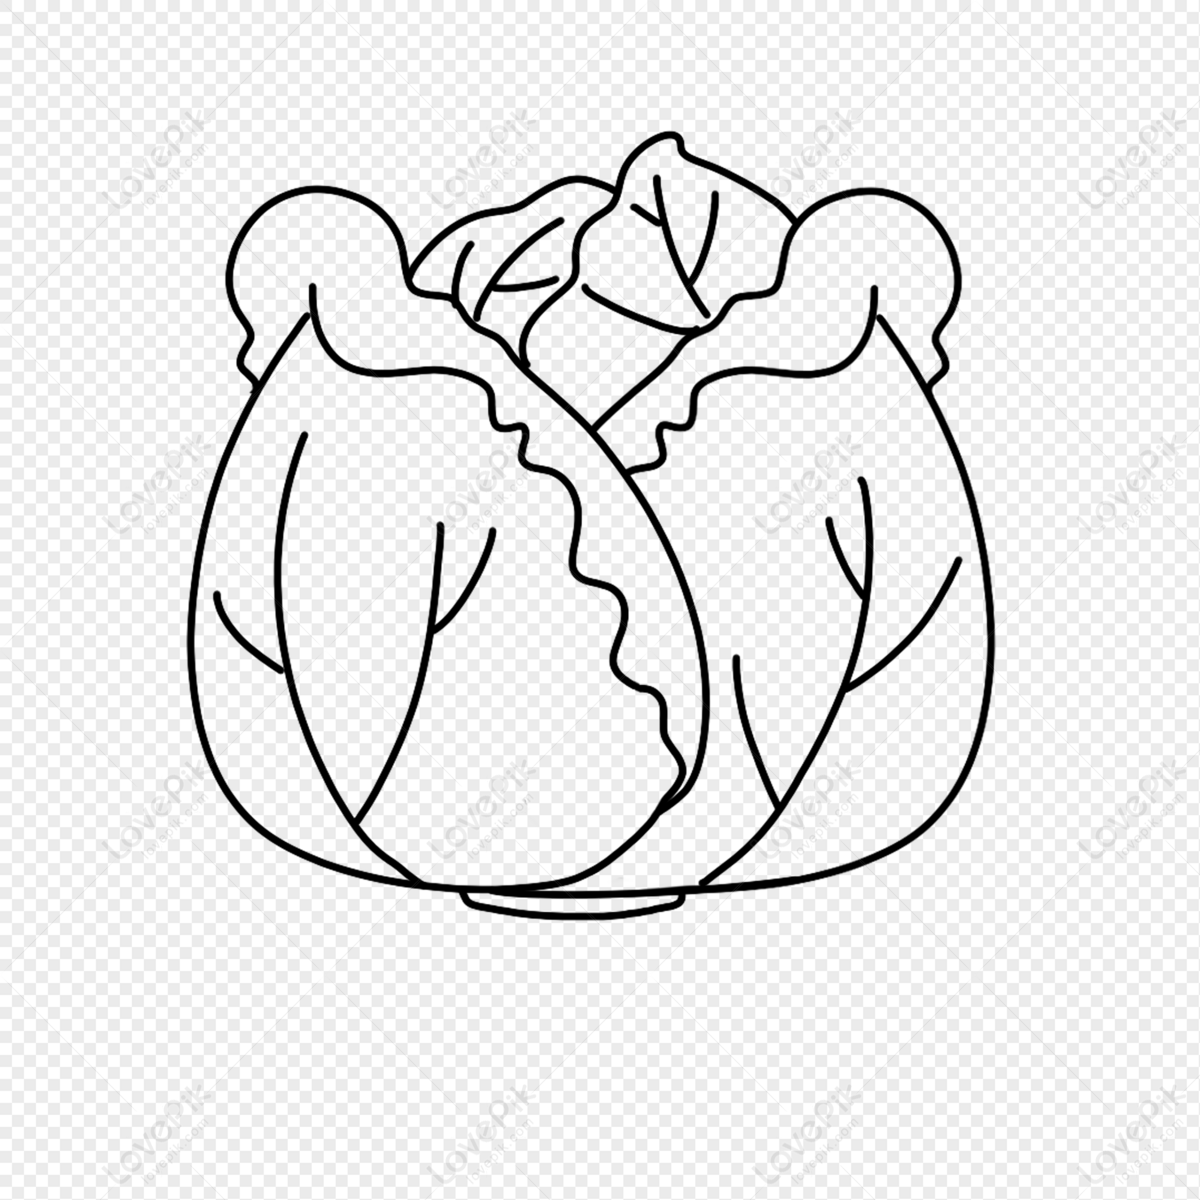 Hand Drawn of Cabbage on A White Background Drawing by Iam Nee - Pixels